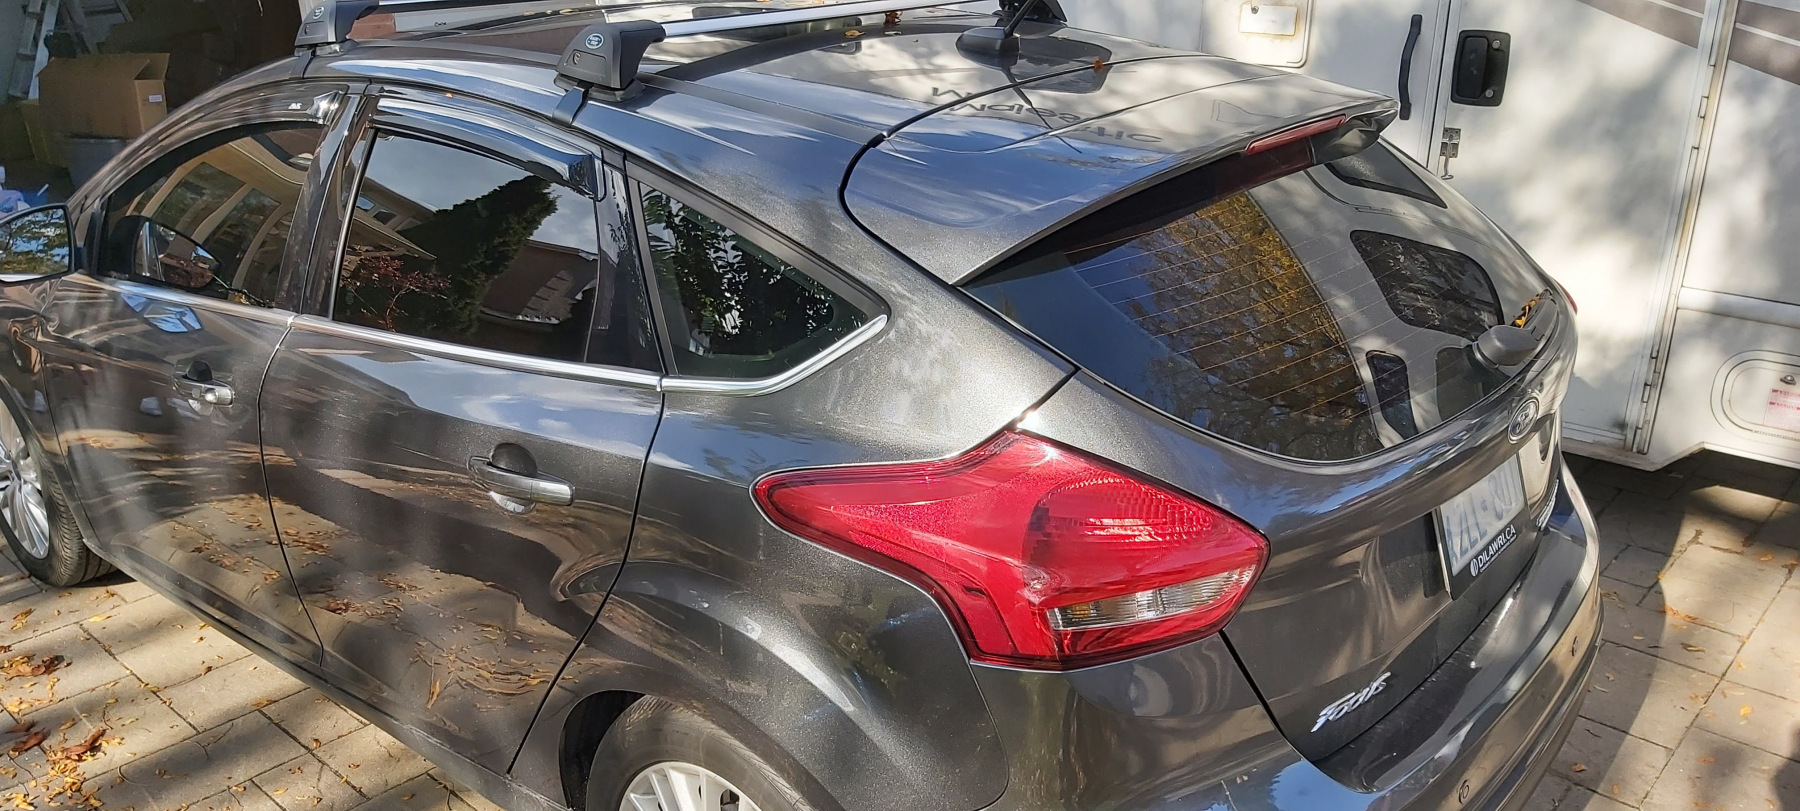 2017 Ford Focus Bare Roof Rack With Low Profile Cargo Carrier - RackTrip - Canada Car Racks and Roof Rack For 2017 Ford Focus Hatchback